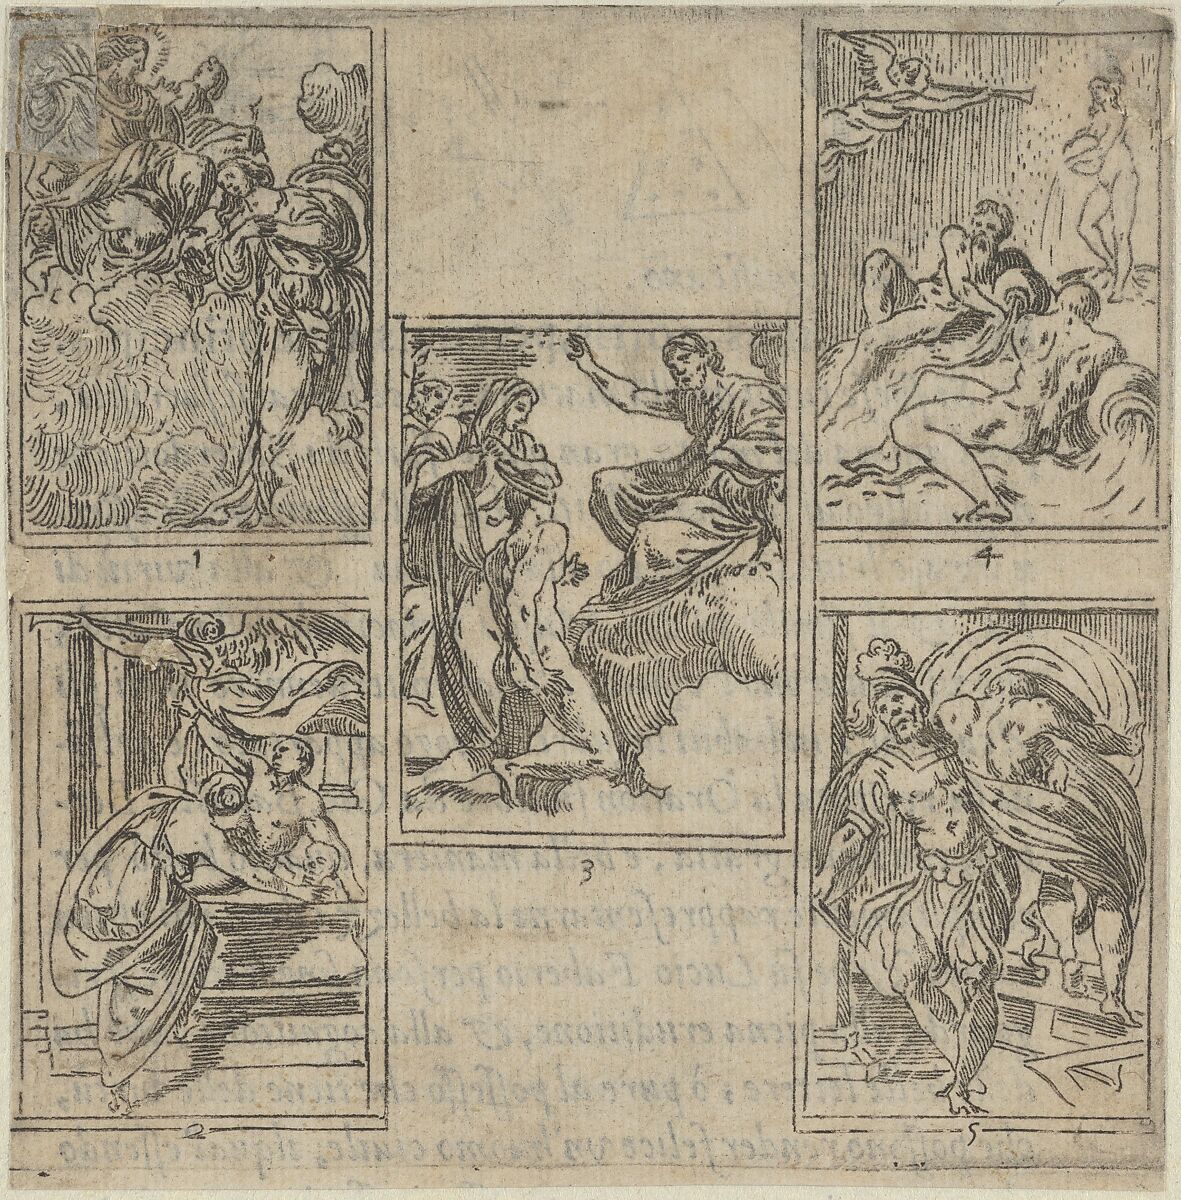 Five numbered scenes, each after a painter in the Accademia Degl'Incamminati, from IL FUNERALE D'AGOSTINO CARRACCIO FATTO IN BOLOGNA SUA PATRIA DAGL'INCAMINATI Academici del Disegno: 1. Ceres lamenting the death of Carracci before Jupiter, painted by Ippolito Ferrantini; 2. Personification of Painting entrusting Carracci's body to Fame, painted by Giovanni Battista Bertusi; 3. The Fates leading the blindfolded Carracci to the foot of Jupiter's throne, painted by Lucio Massari; 4. Three rivers representing the cities of Bologna, Rome and Parma (Reno, Tiber and Parma) with Fame at left, designed by Sebastiano Razzali and painted by Baldessare Aloisi Galanini; 5. Agostino Carracci abducted by Mars who is jealous of the artist's portrait of Adonis made for a Farnese gallery panel, painted by Giovanni Battista Busi., Guido Reni (Italian, Bologna 1575–1642 Bologna), Etching 